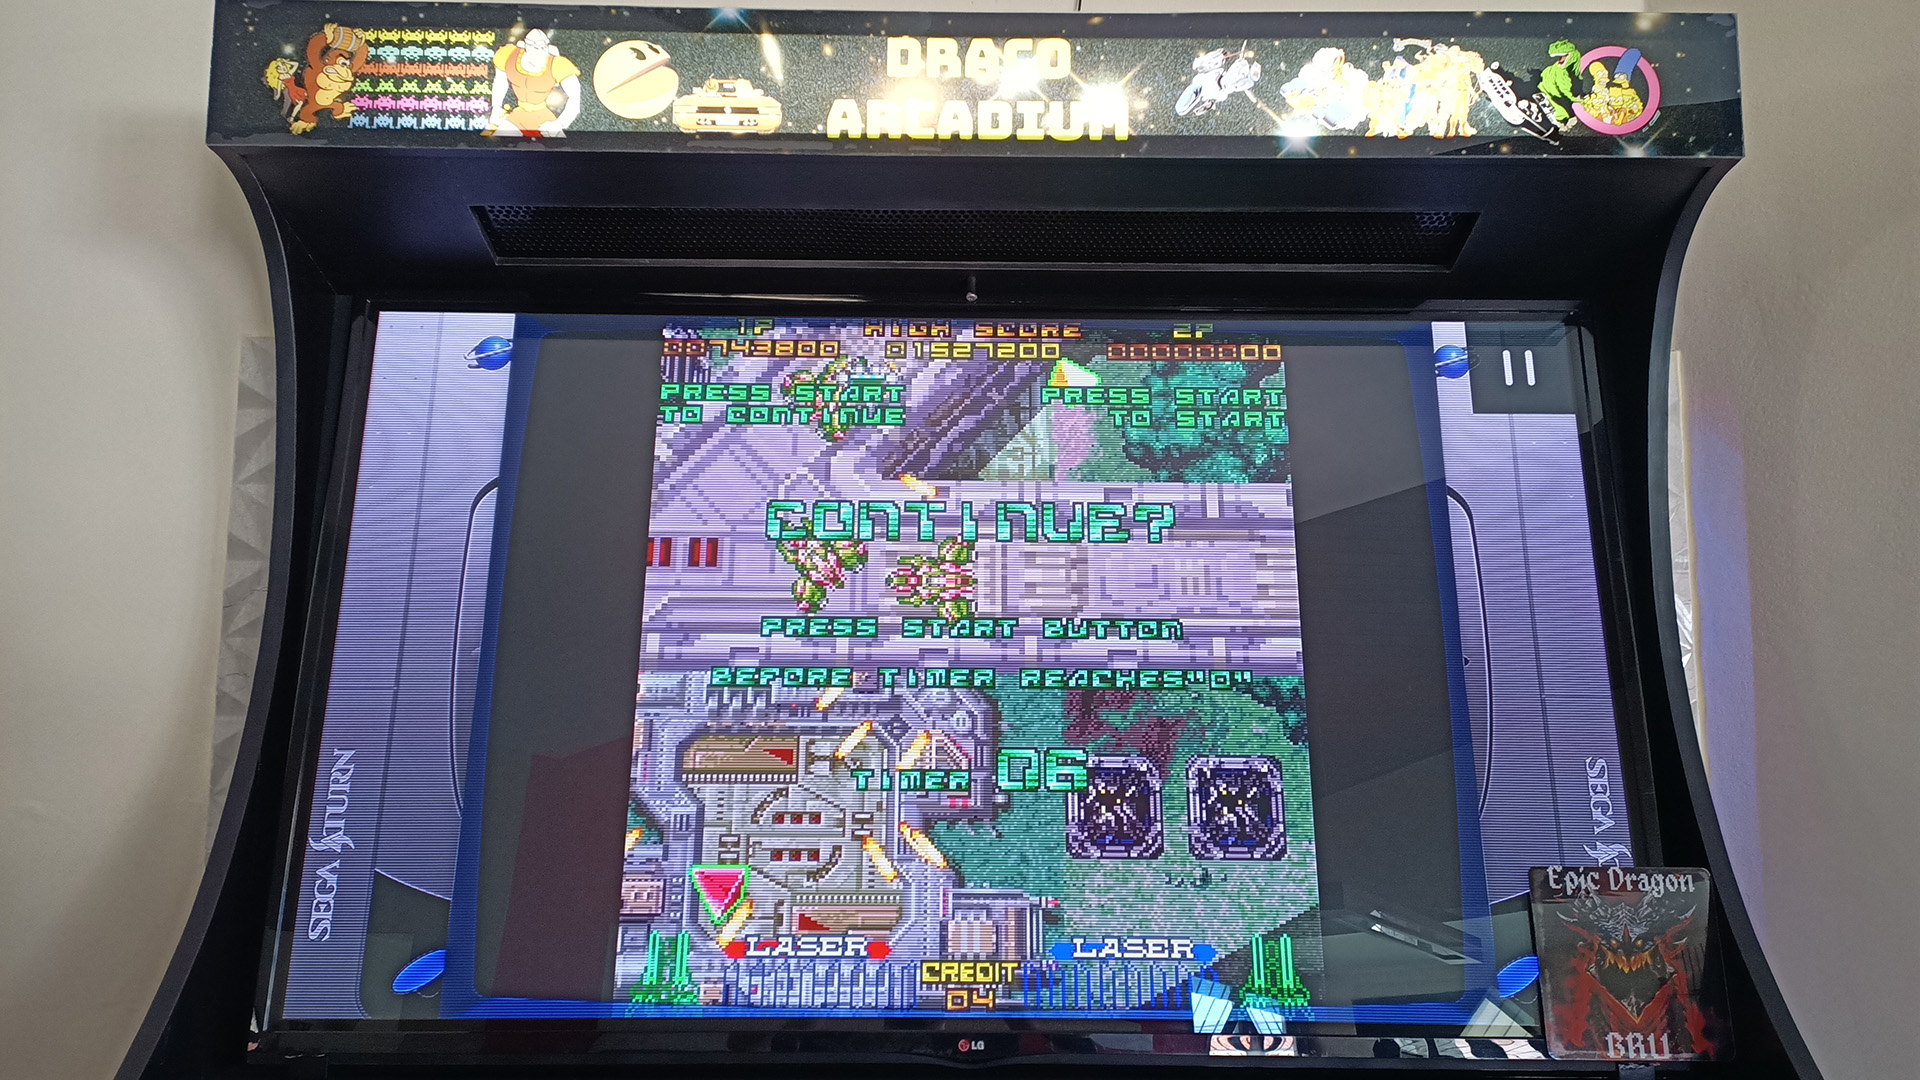 EpicDragon: Galactic Attack: Hard 4 (Sega Saturn Emulated) 743,800 points on 2022-08-14 14:51:15